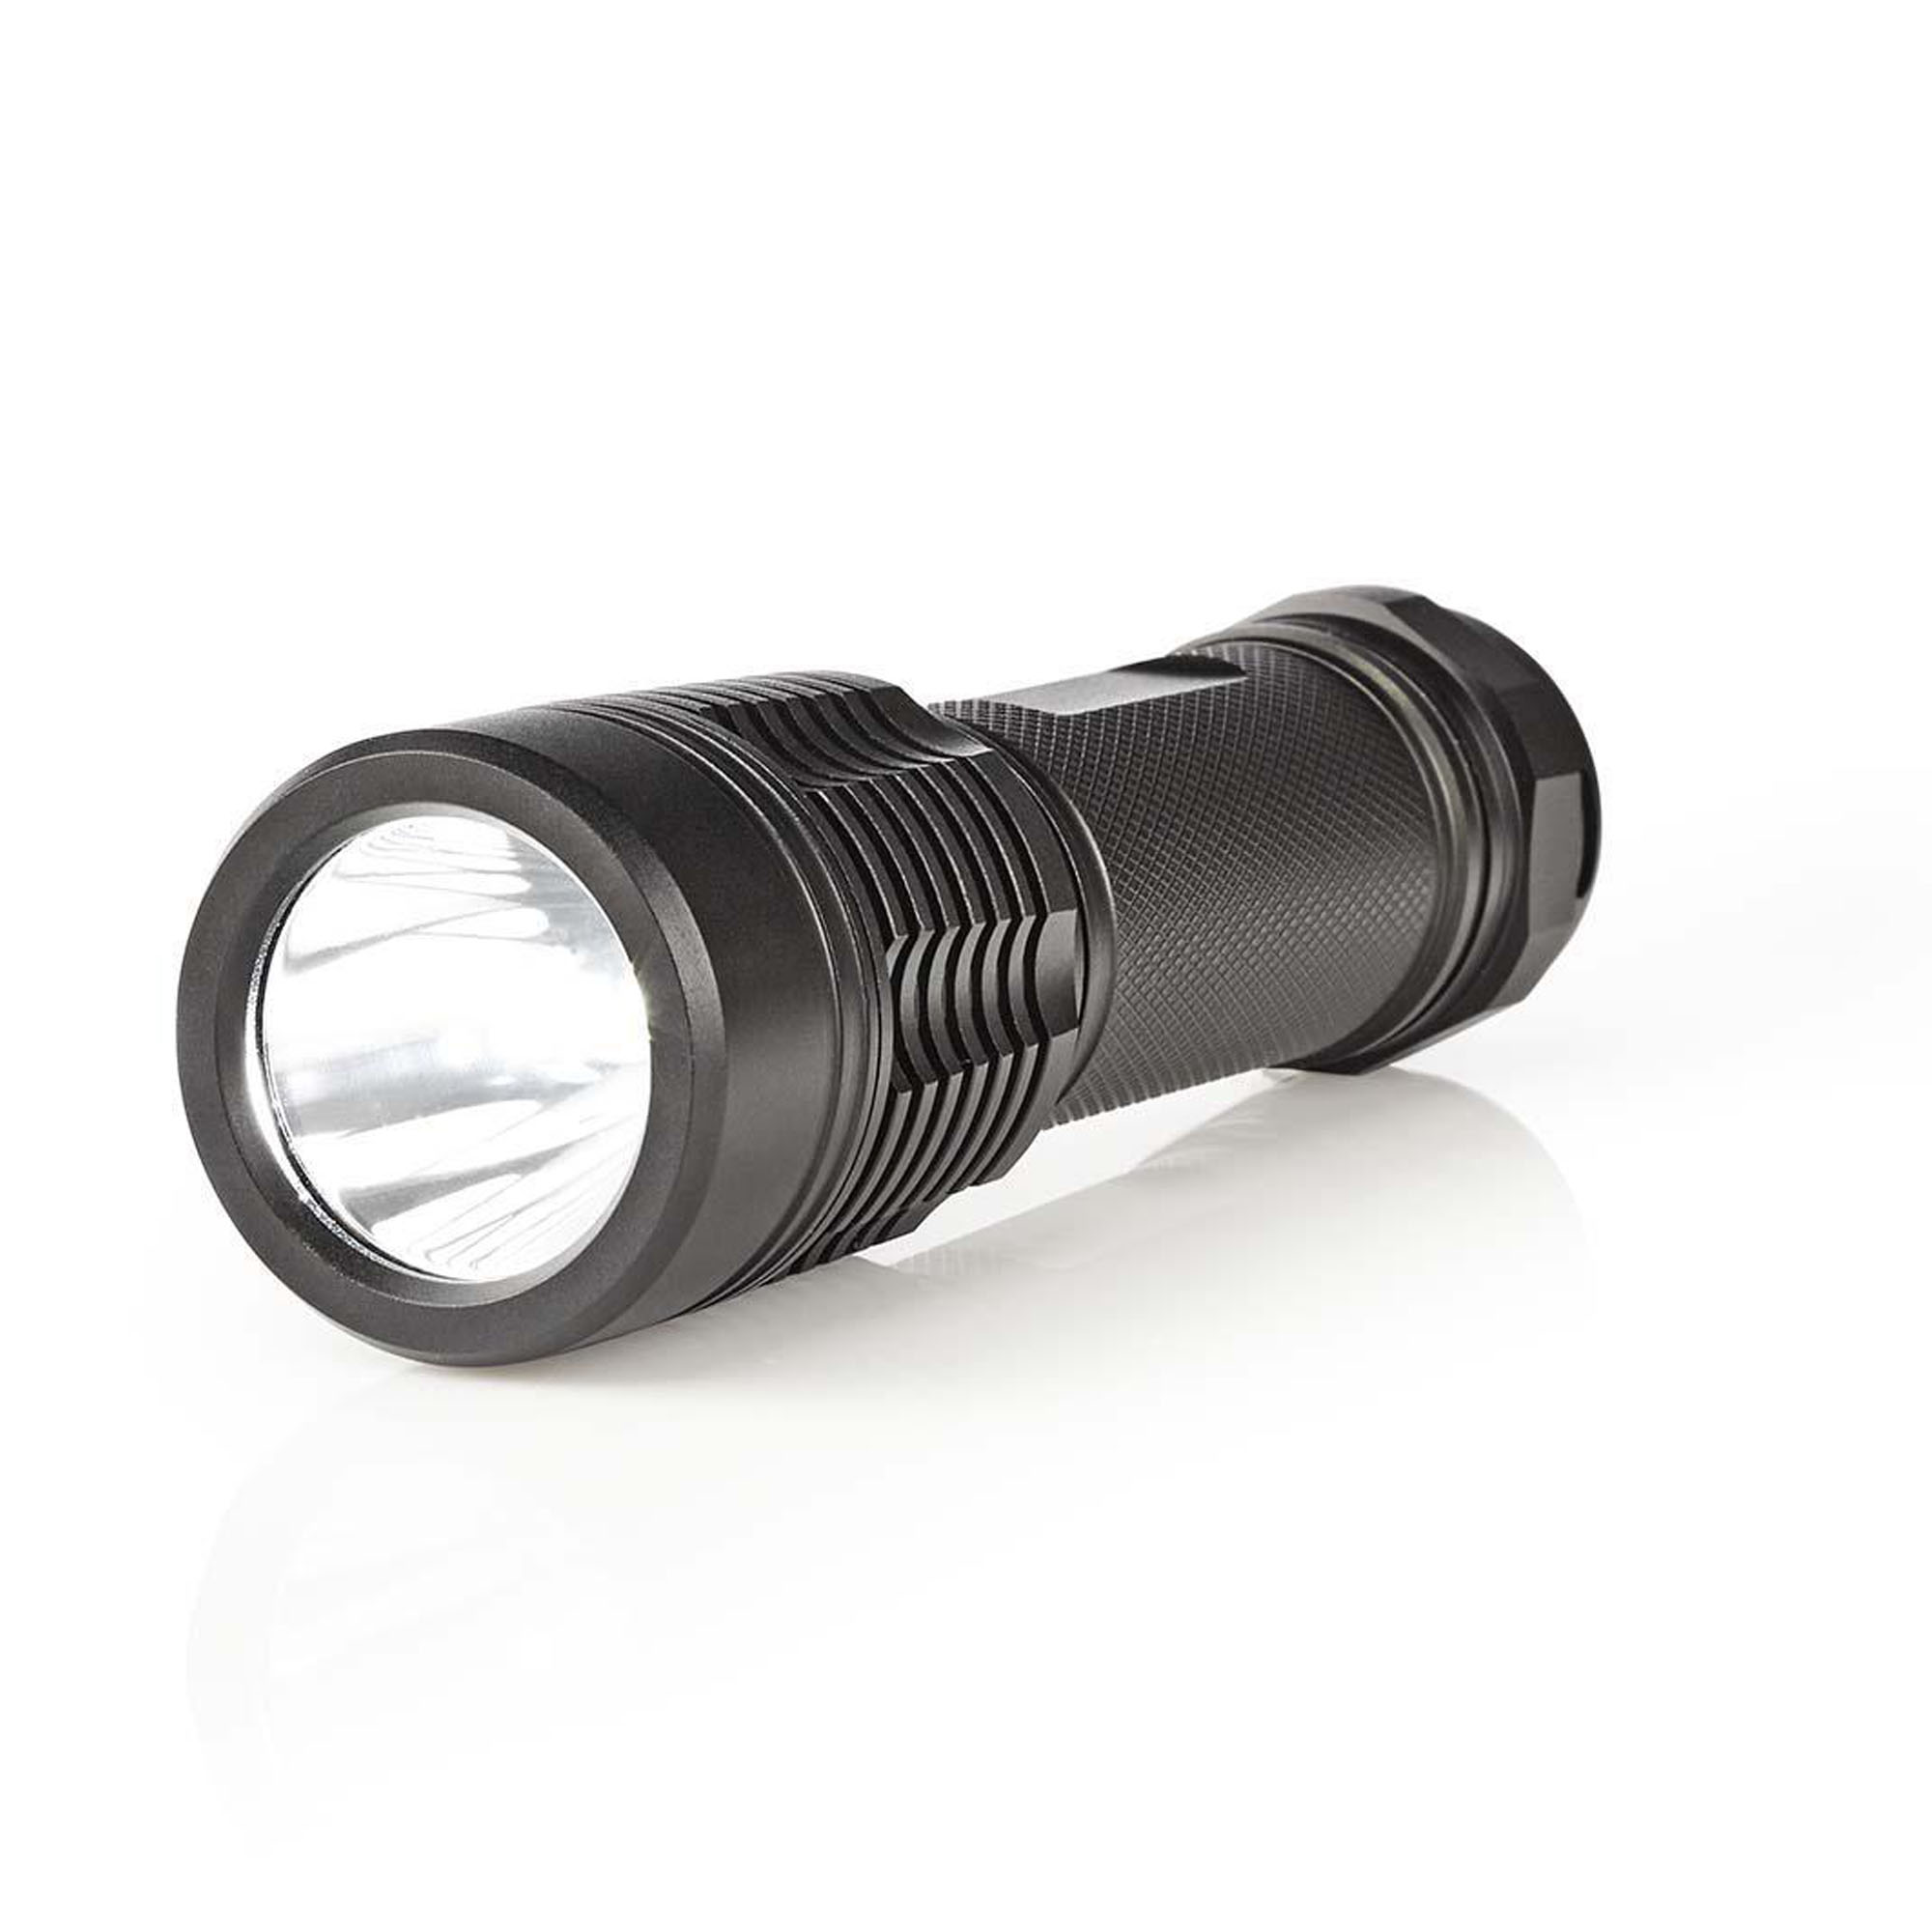 IPX7 5W 280 lumen Super Bright LED Torch Flashlight Camp Light Lamp Zoomable 